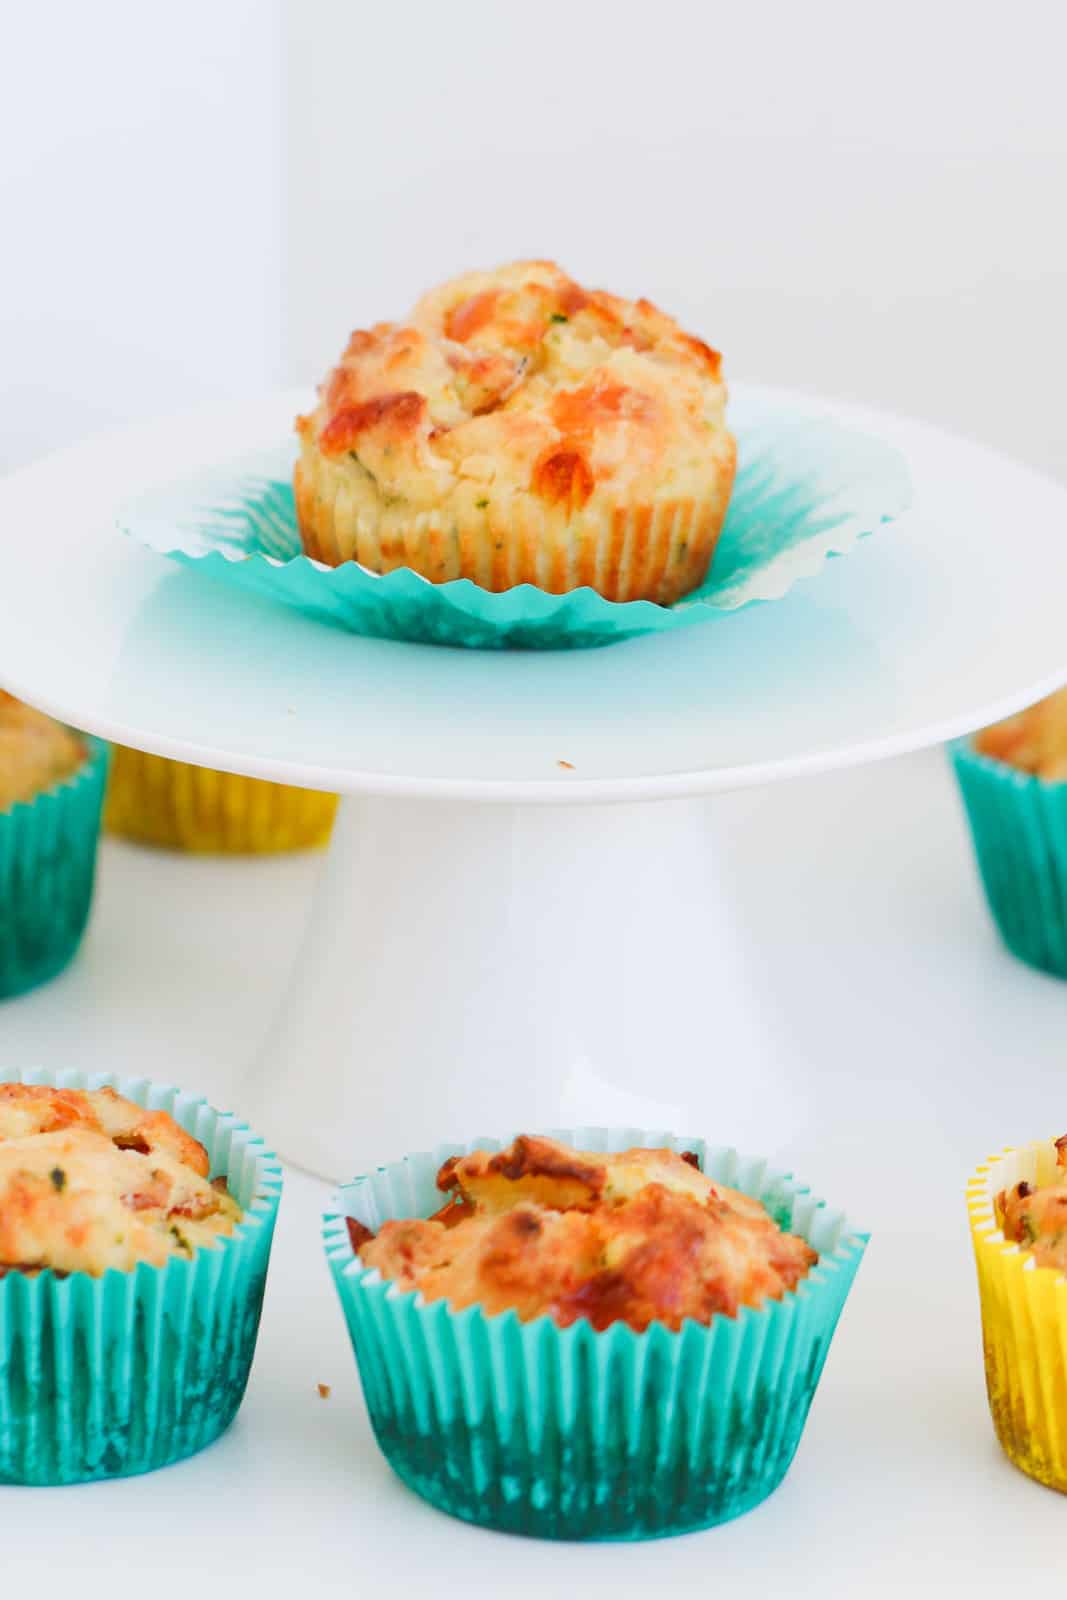 A savoury muffin on a white cake plate with more muffins in the background.